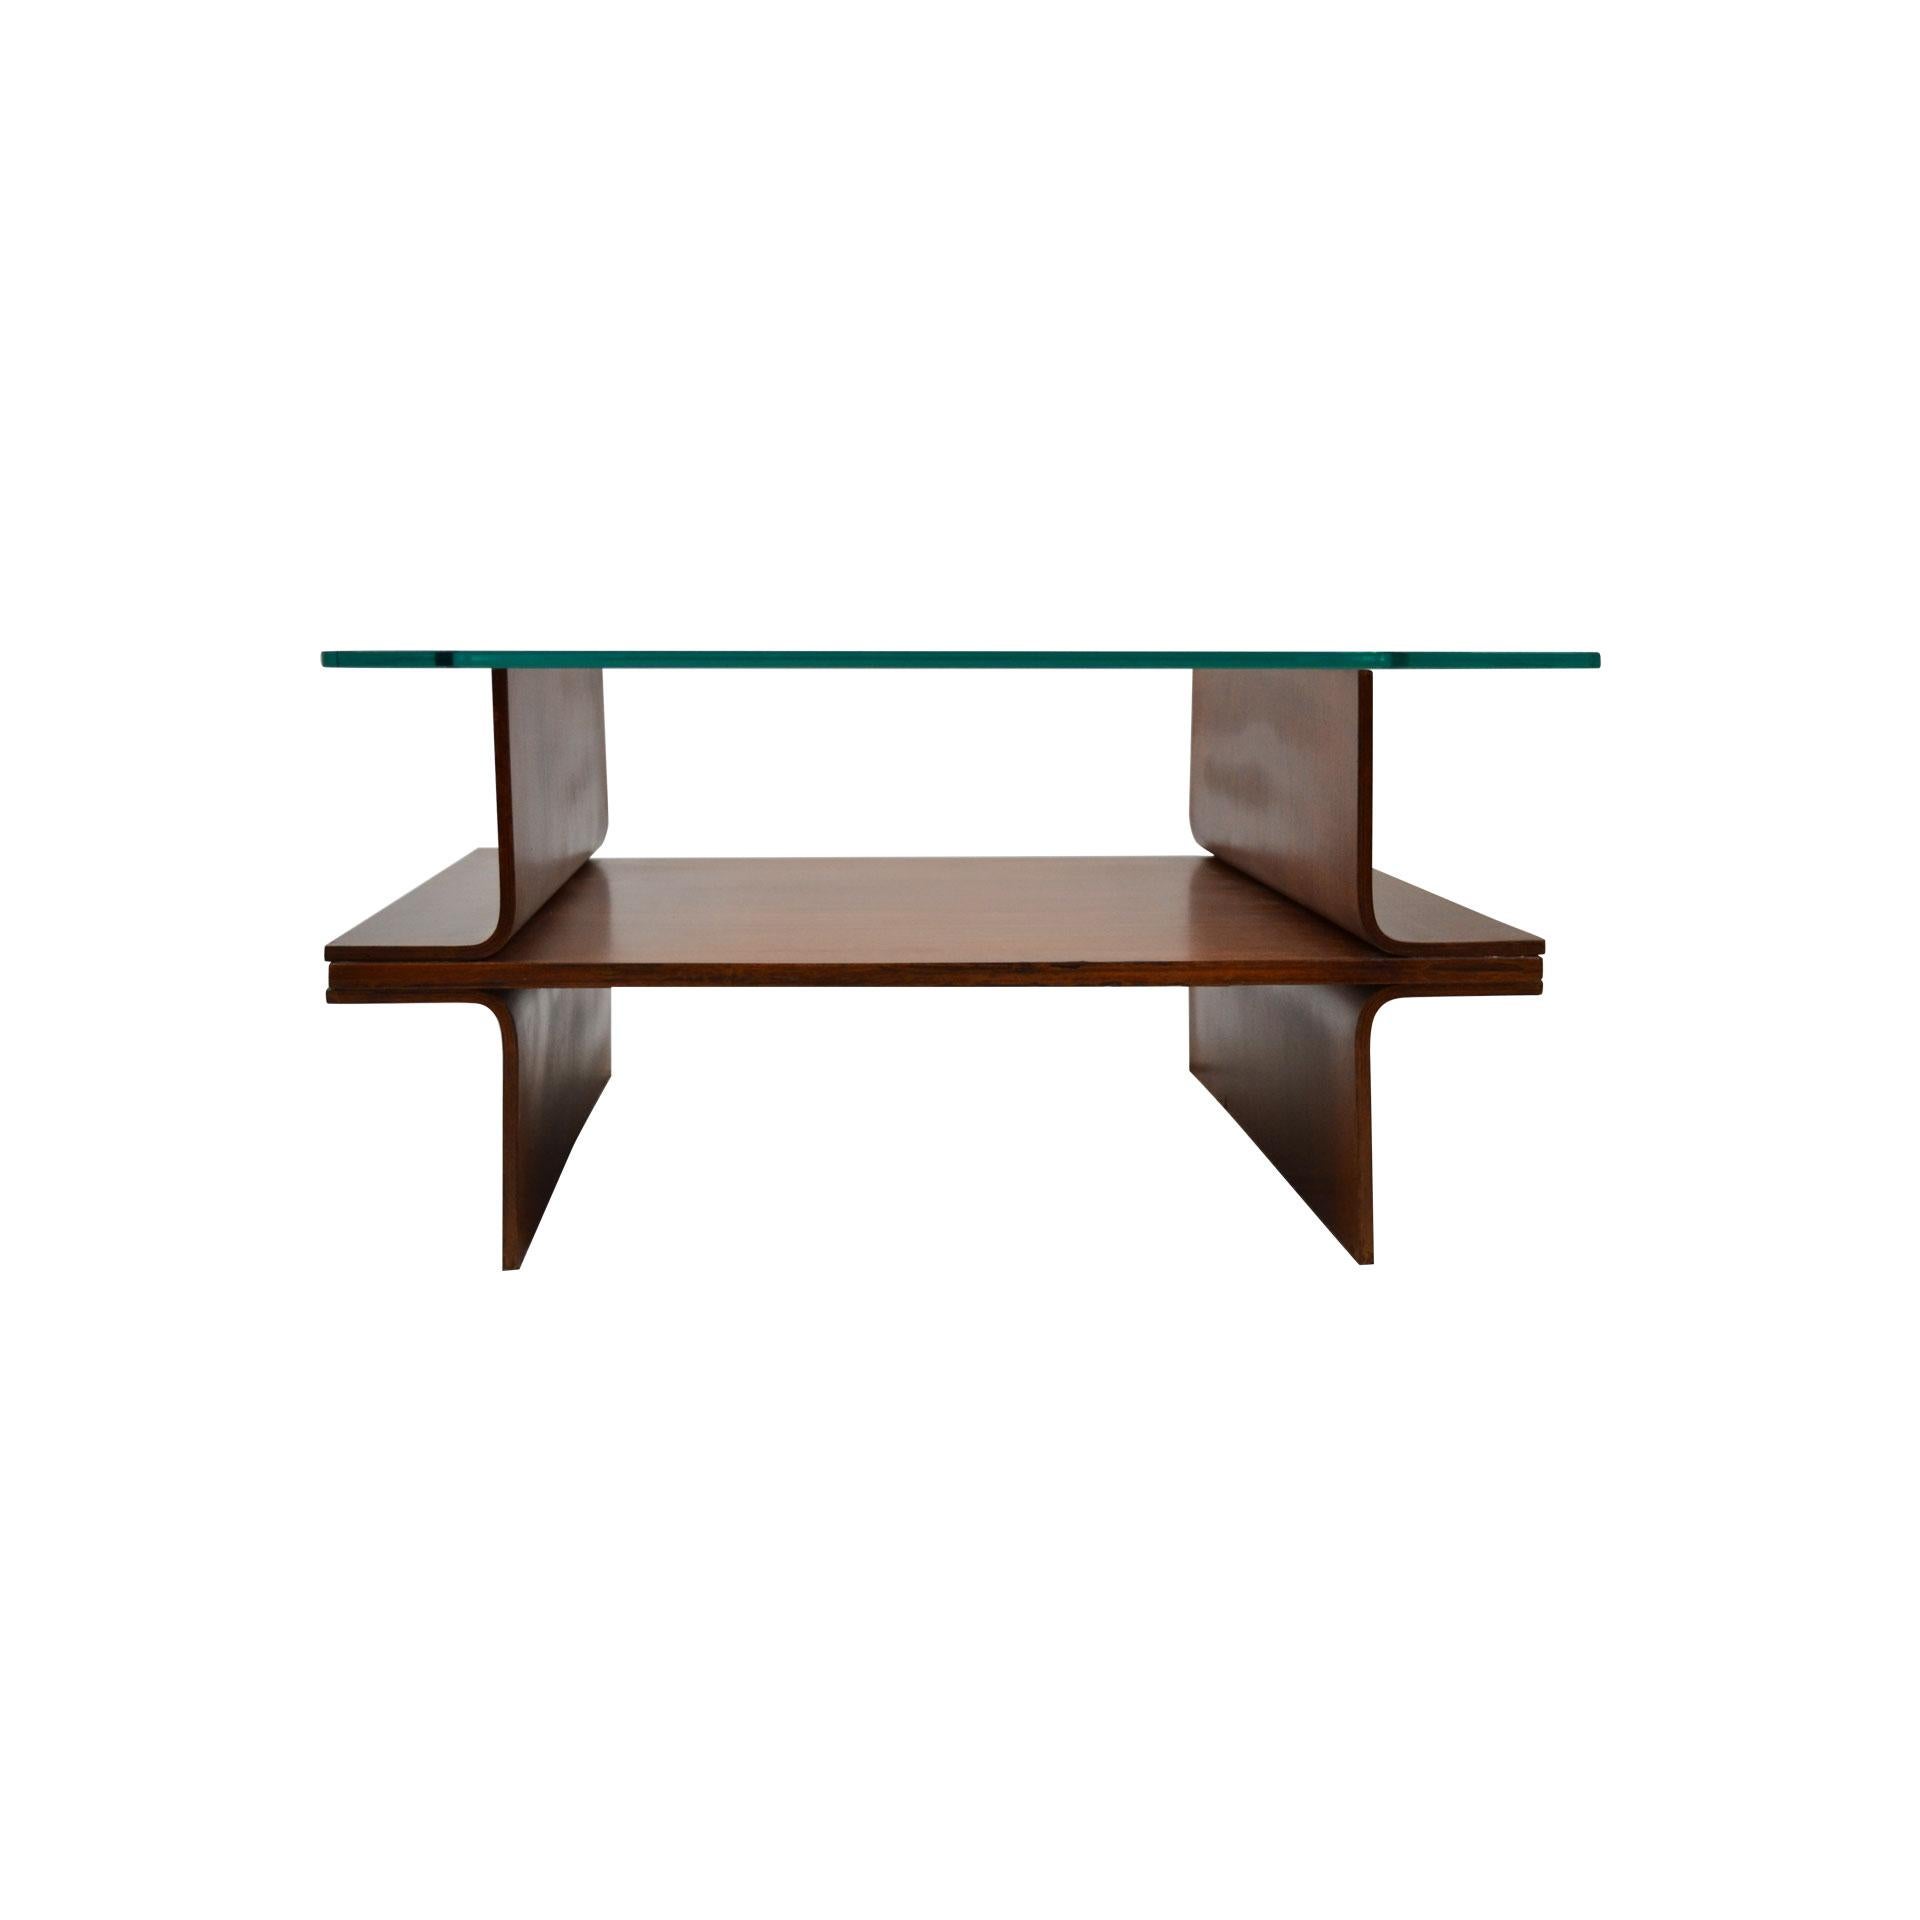 Coffee table designed in 1960, Italian School, with structure in curved wood and top in squared glass. Very good condition.